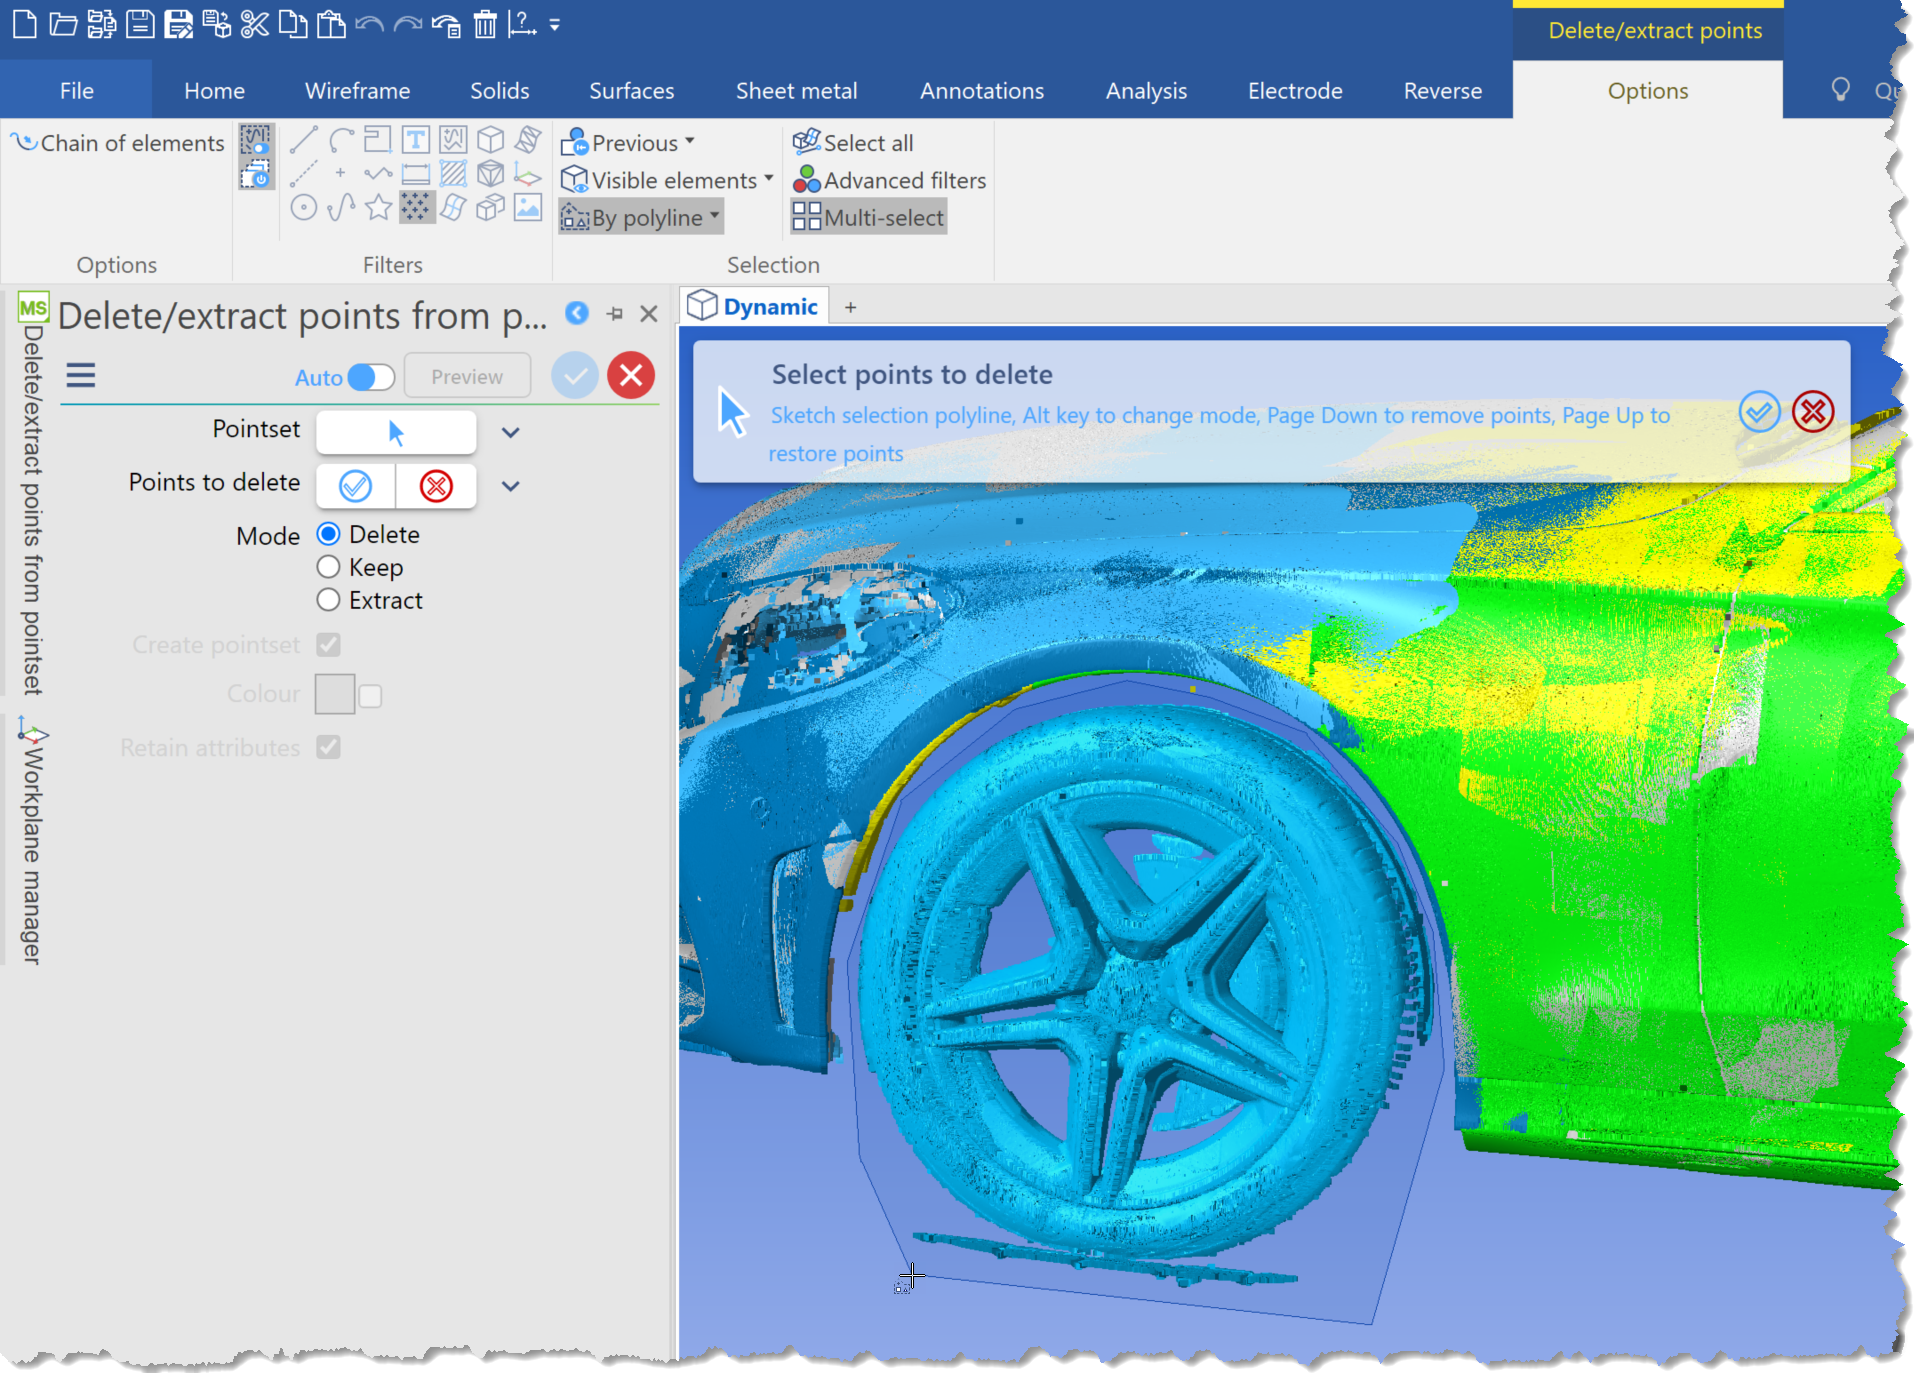 Reverse engineering software imaging showing a comparison of CAD to Mesh